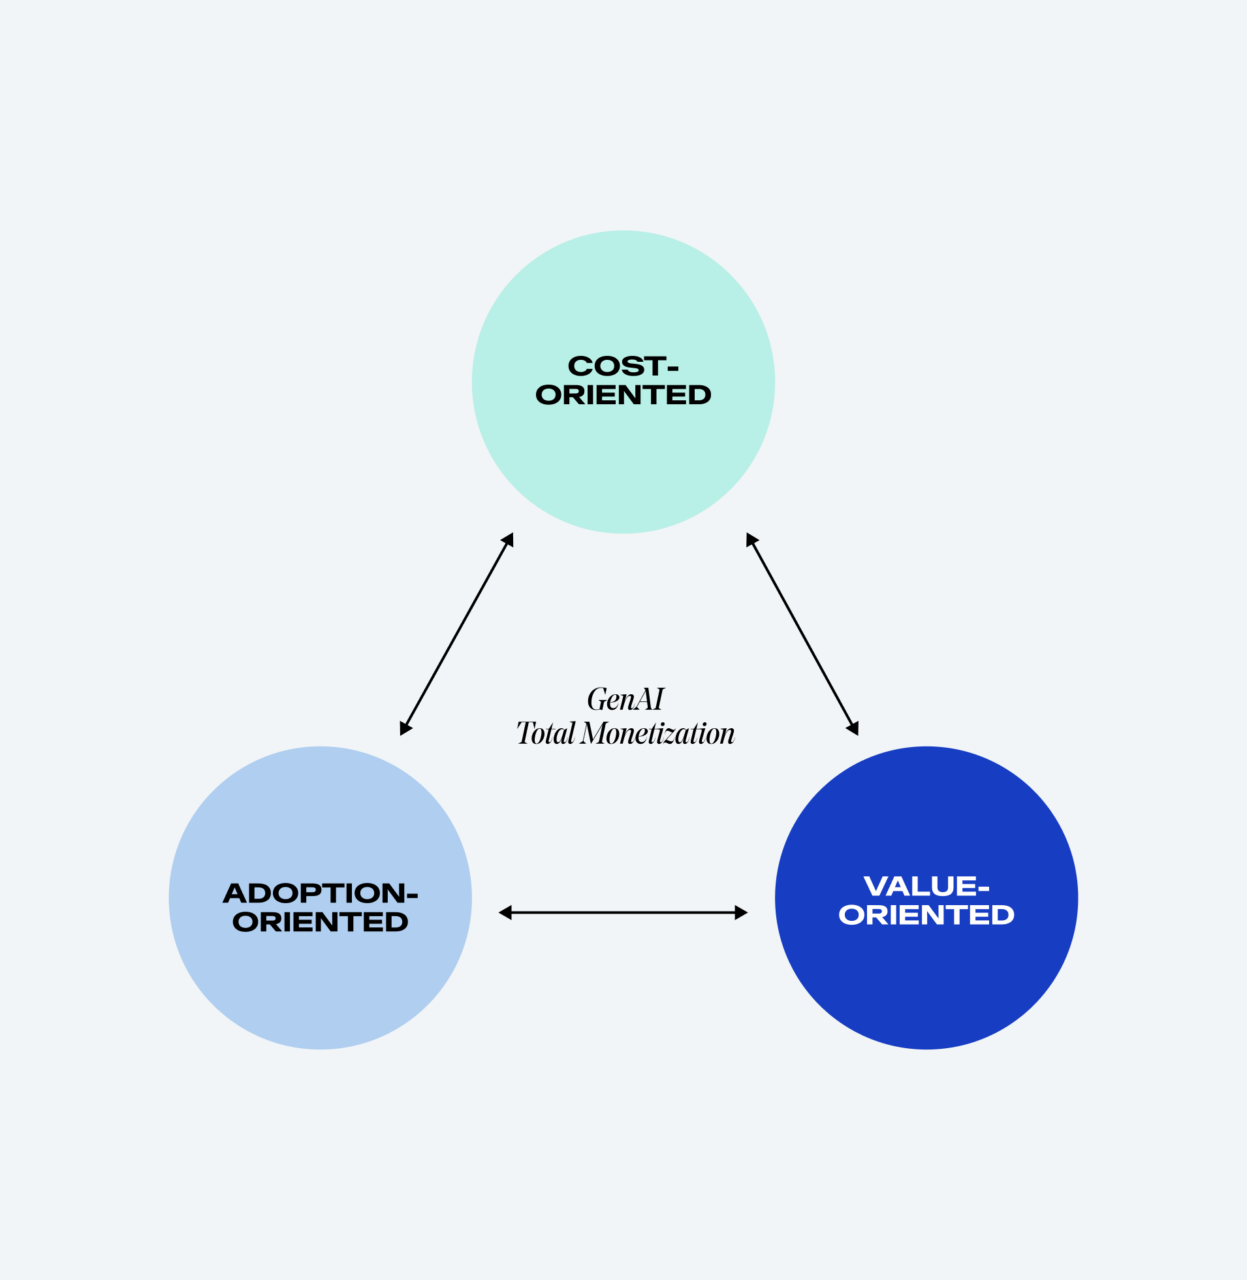 Diagram showing three interlinked circles labeled "cost-oriented," "adoption-oriented," and "value-oriented," with "genai total monetization" at the center.